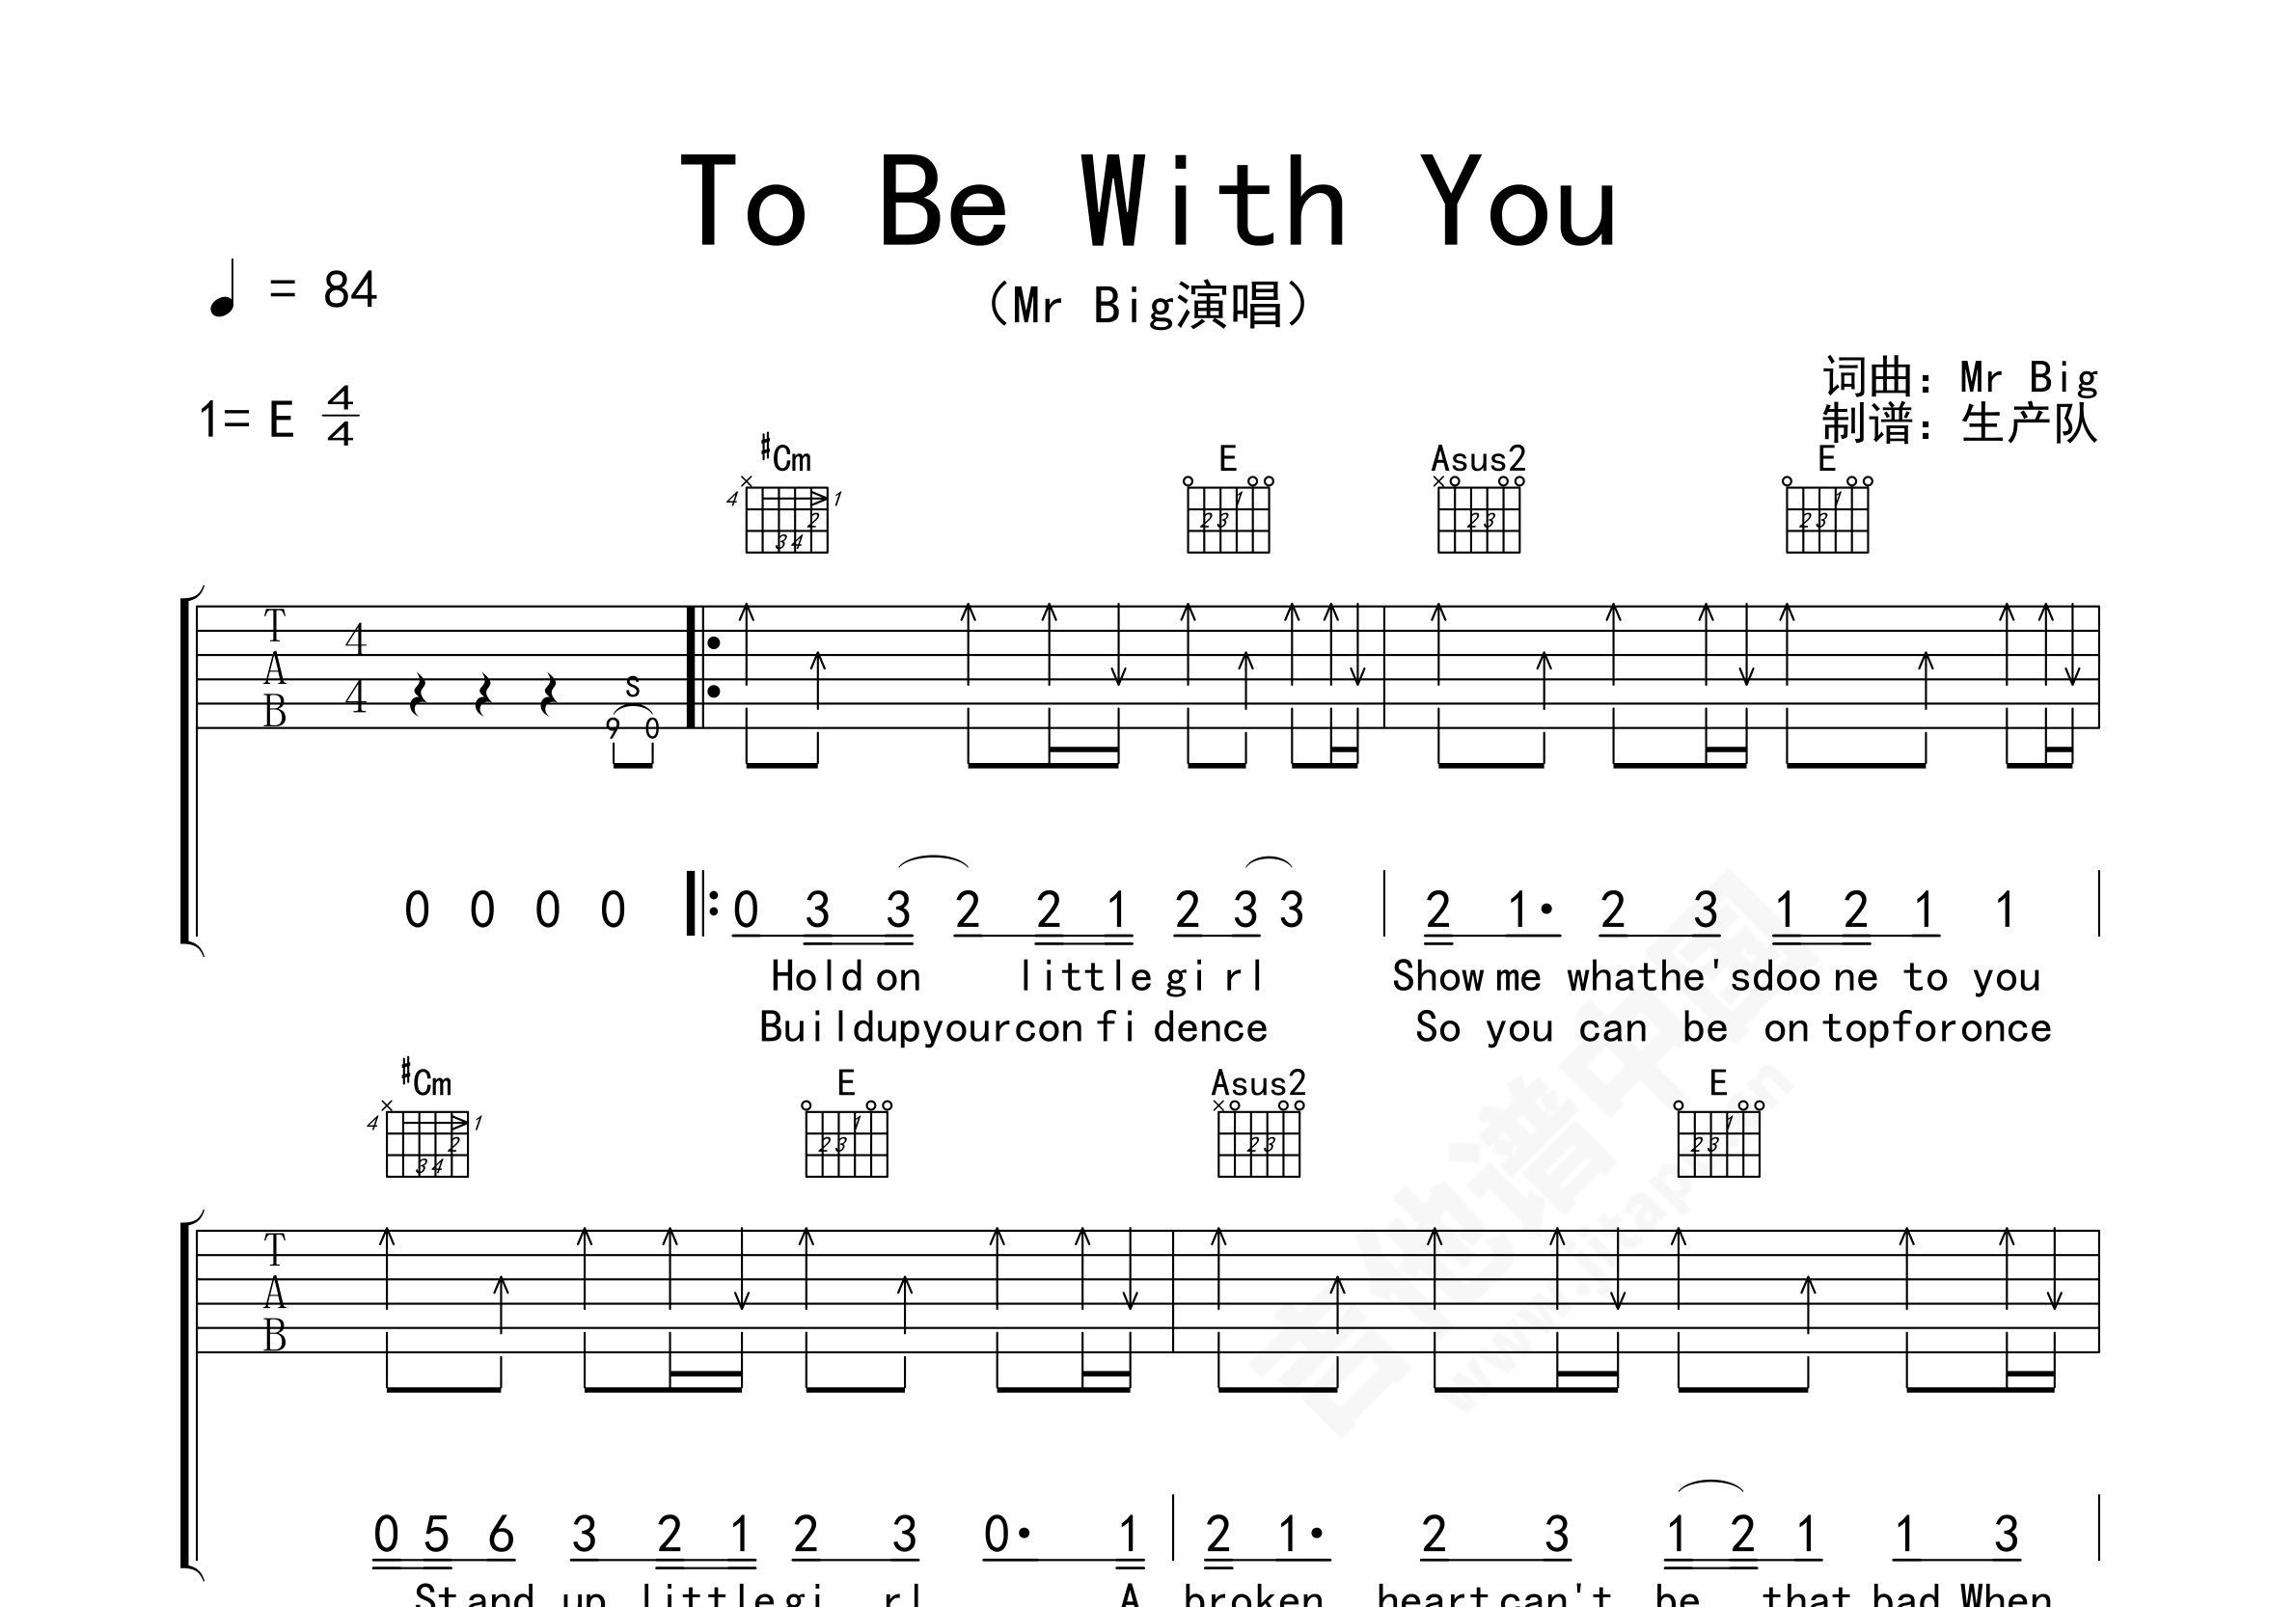 To be with you